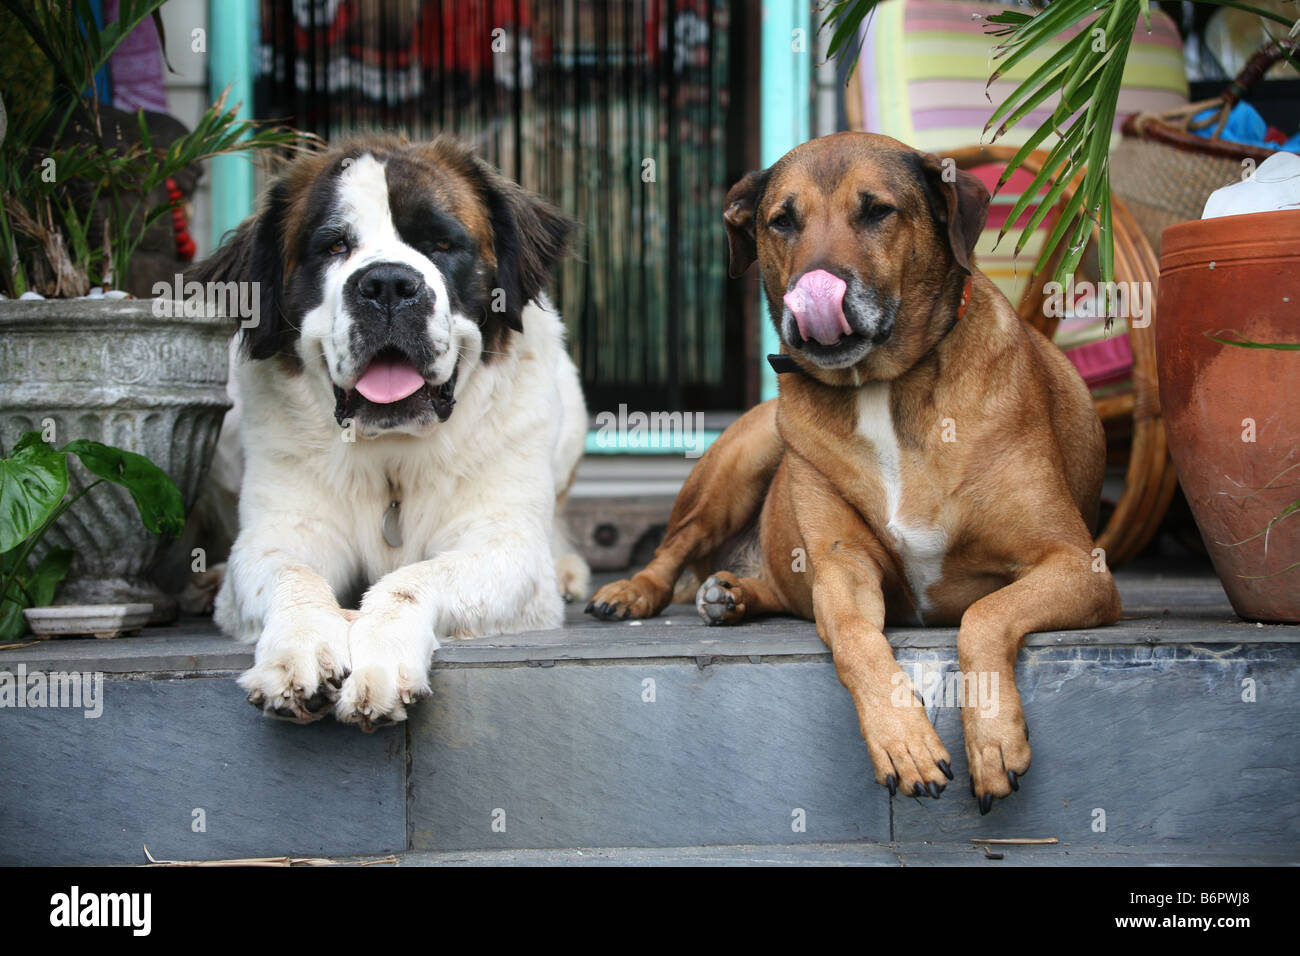 A Saint Bernhard and a Ridgeback relax on the doorstep of a tropical cottage Stock Photo